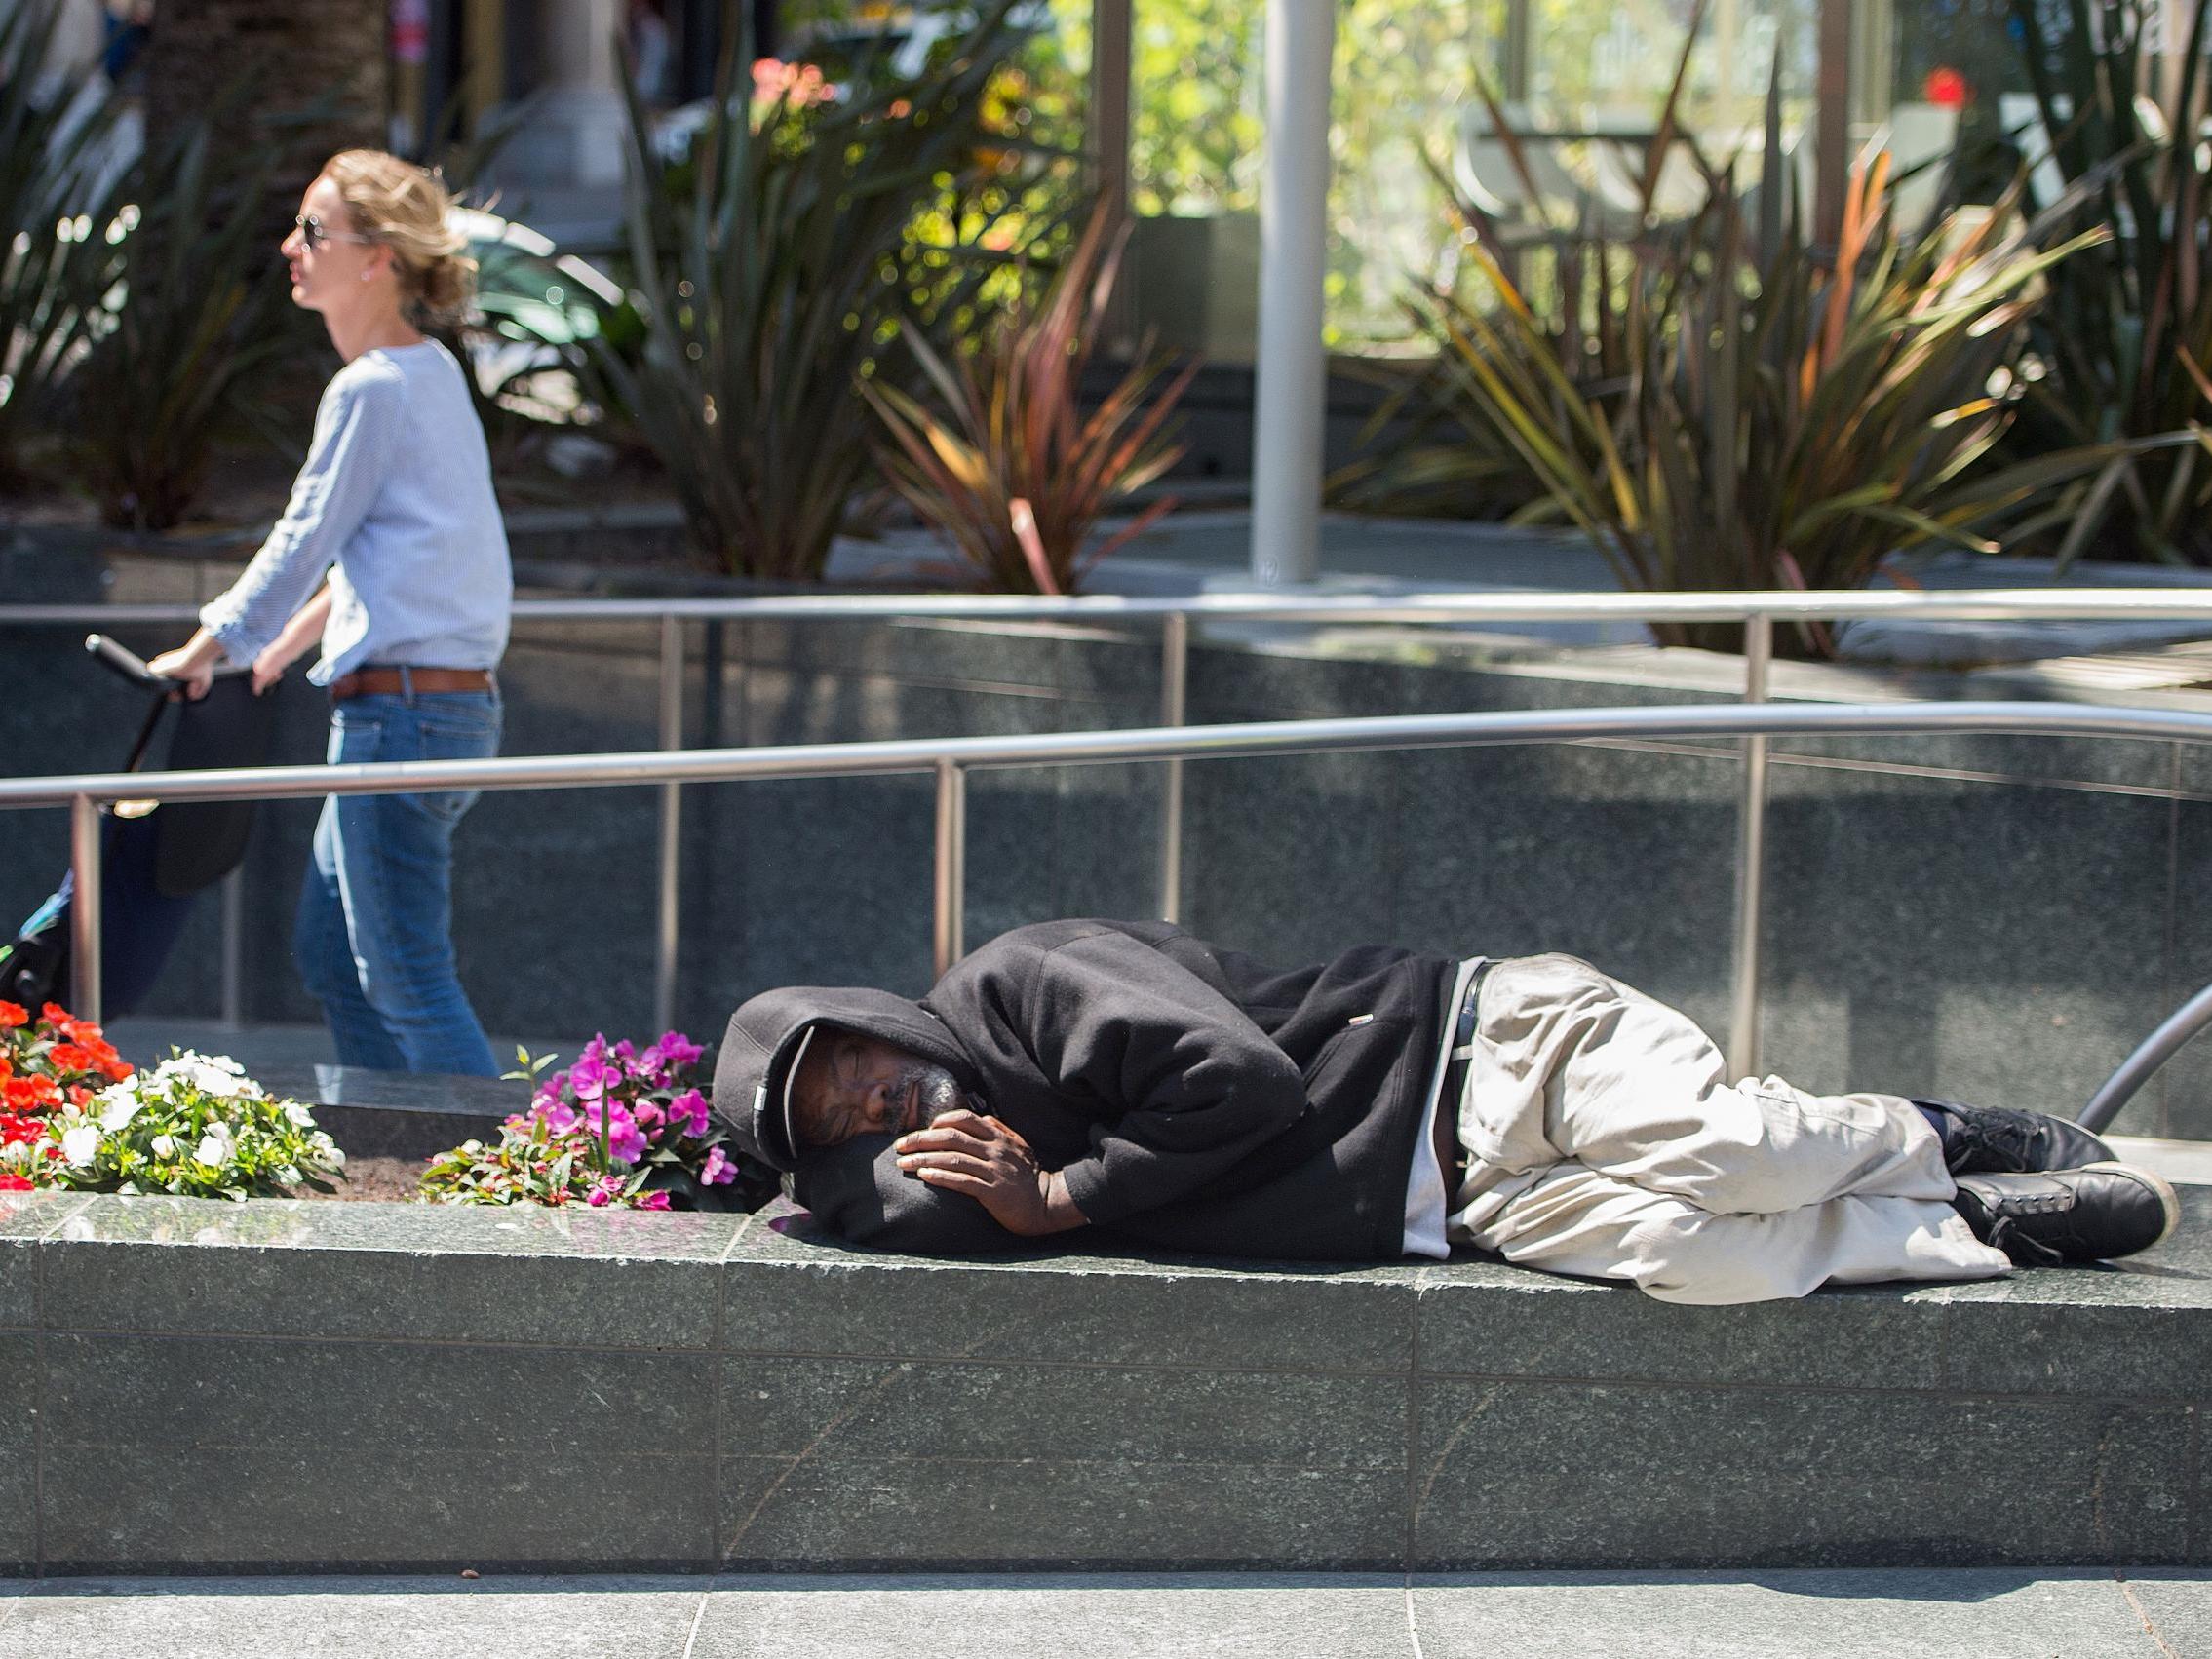 A homeless man sleeps in San Francisco, where more than 7,000 people have nowhere to live